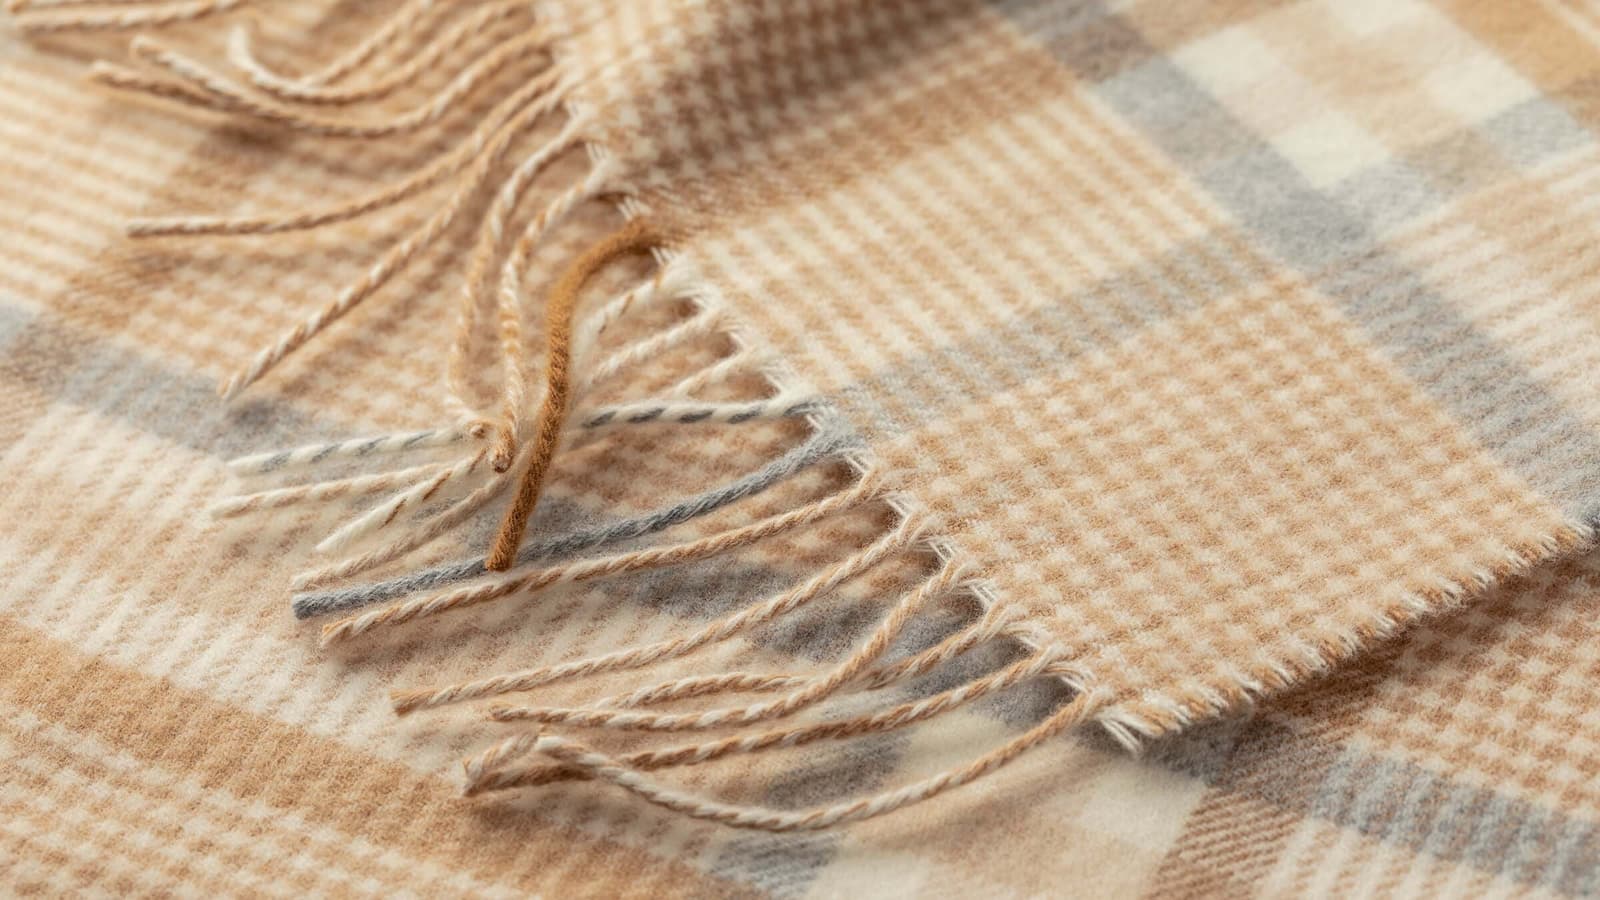 Johnstons of Elgin Merino camel, grey and white check scarf detail